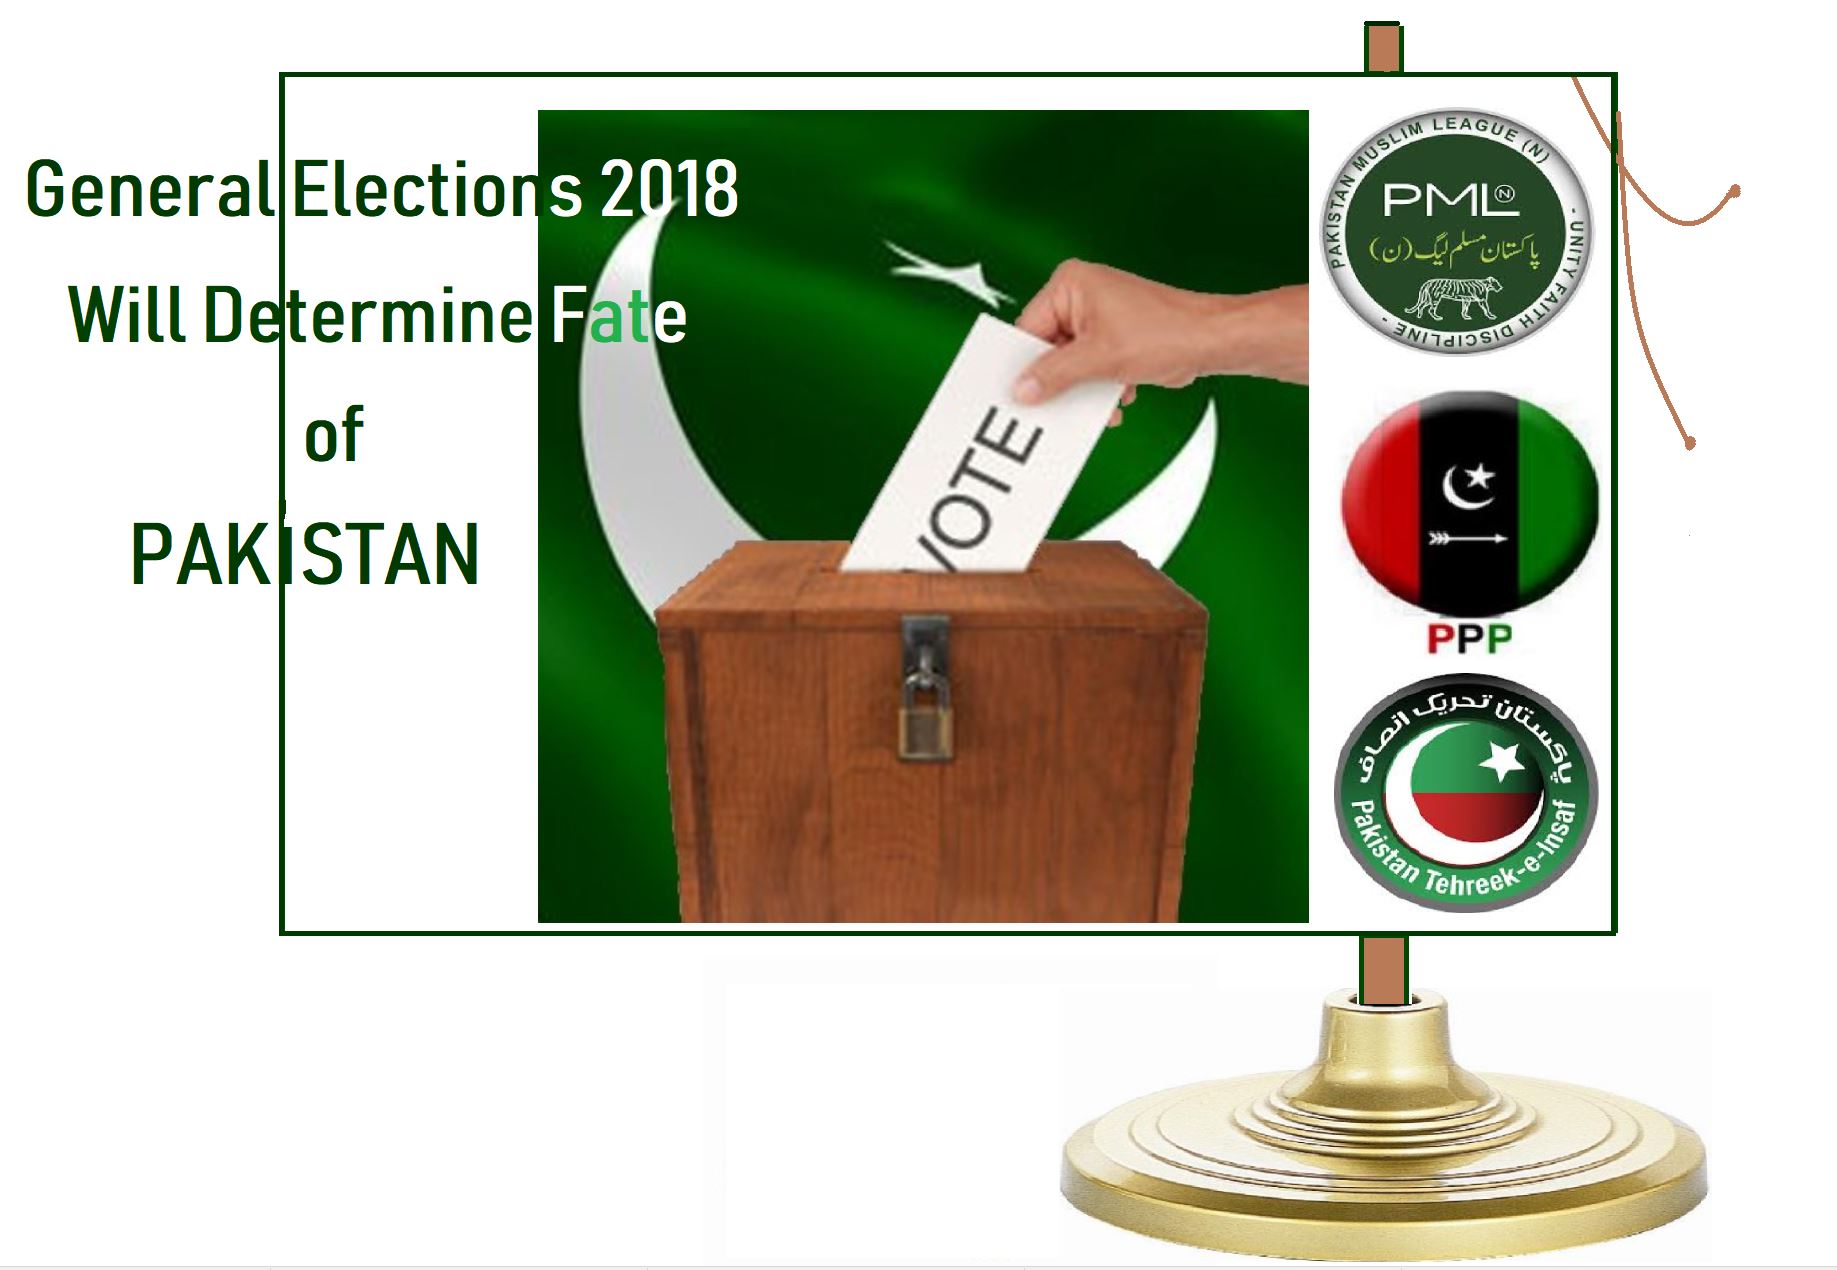 General Elections 2018